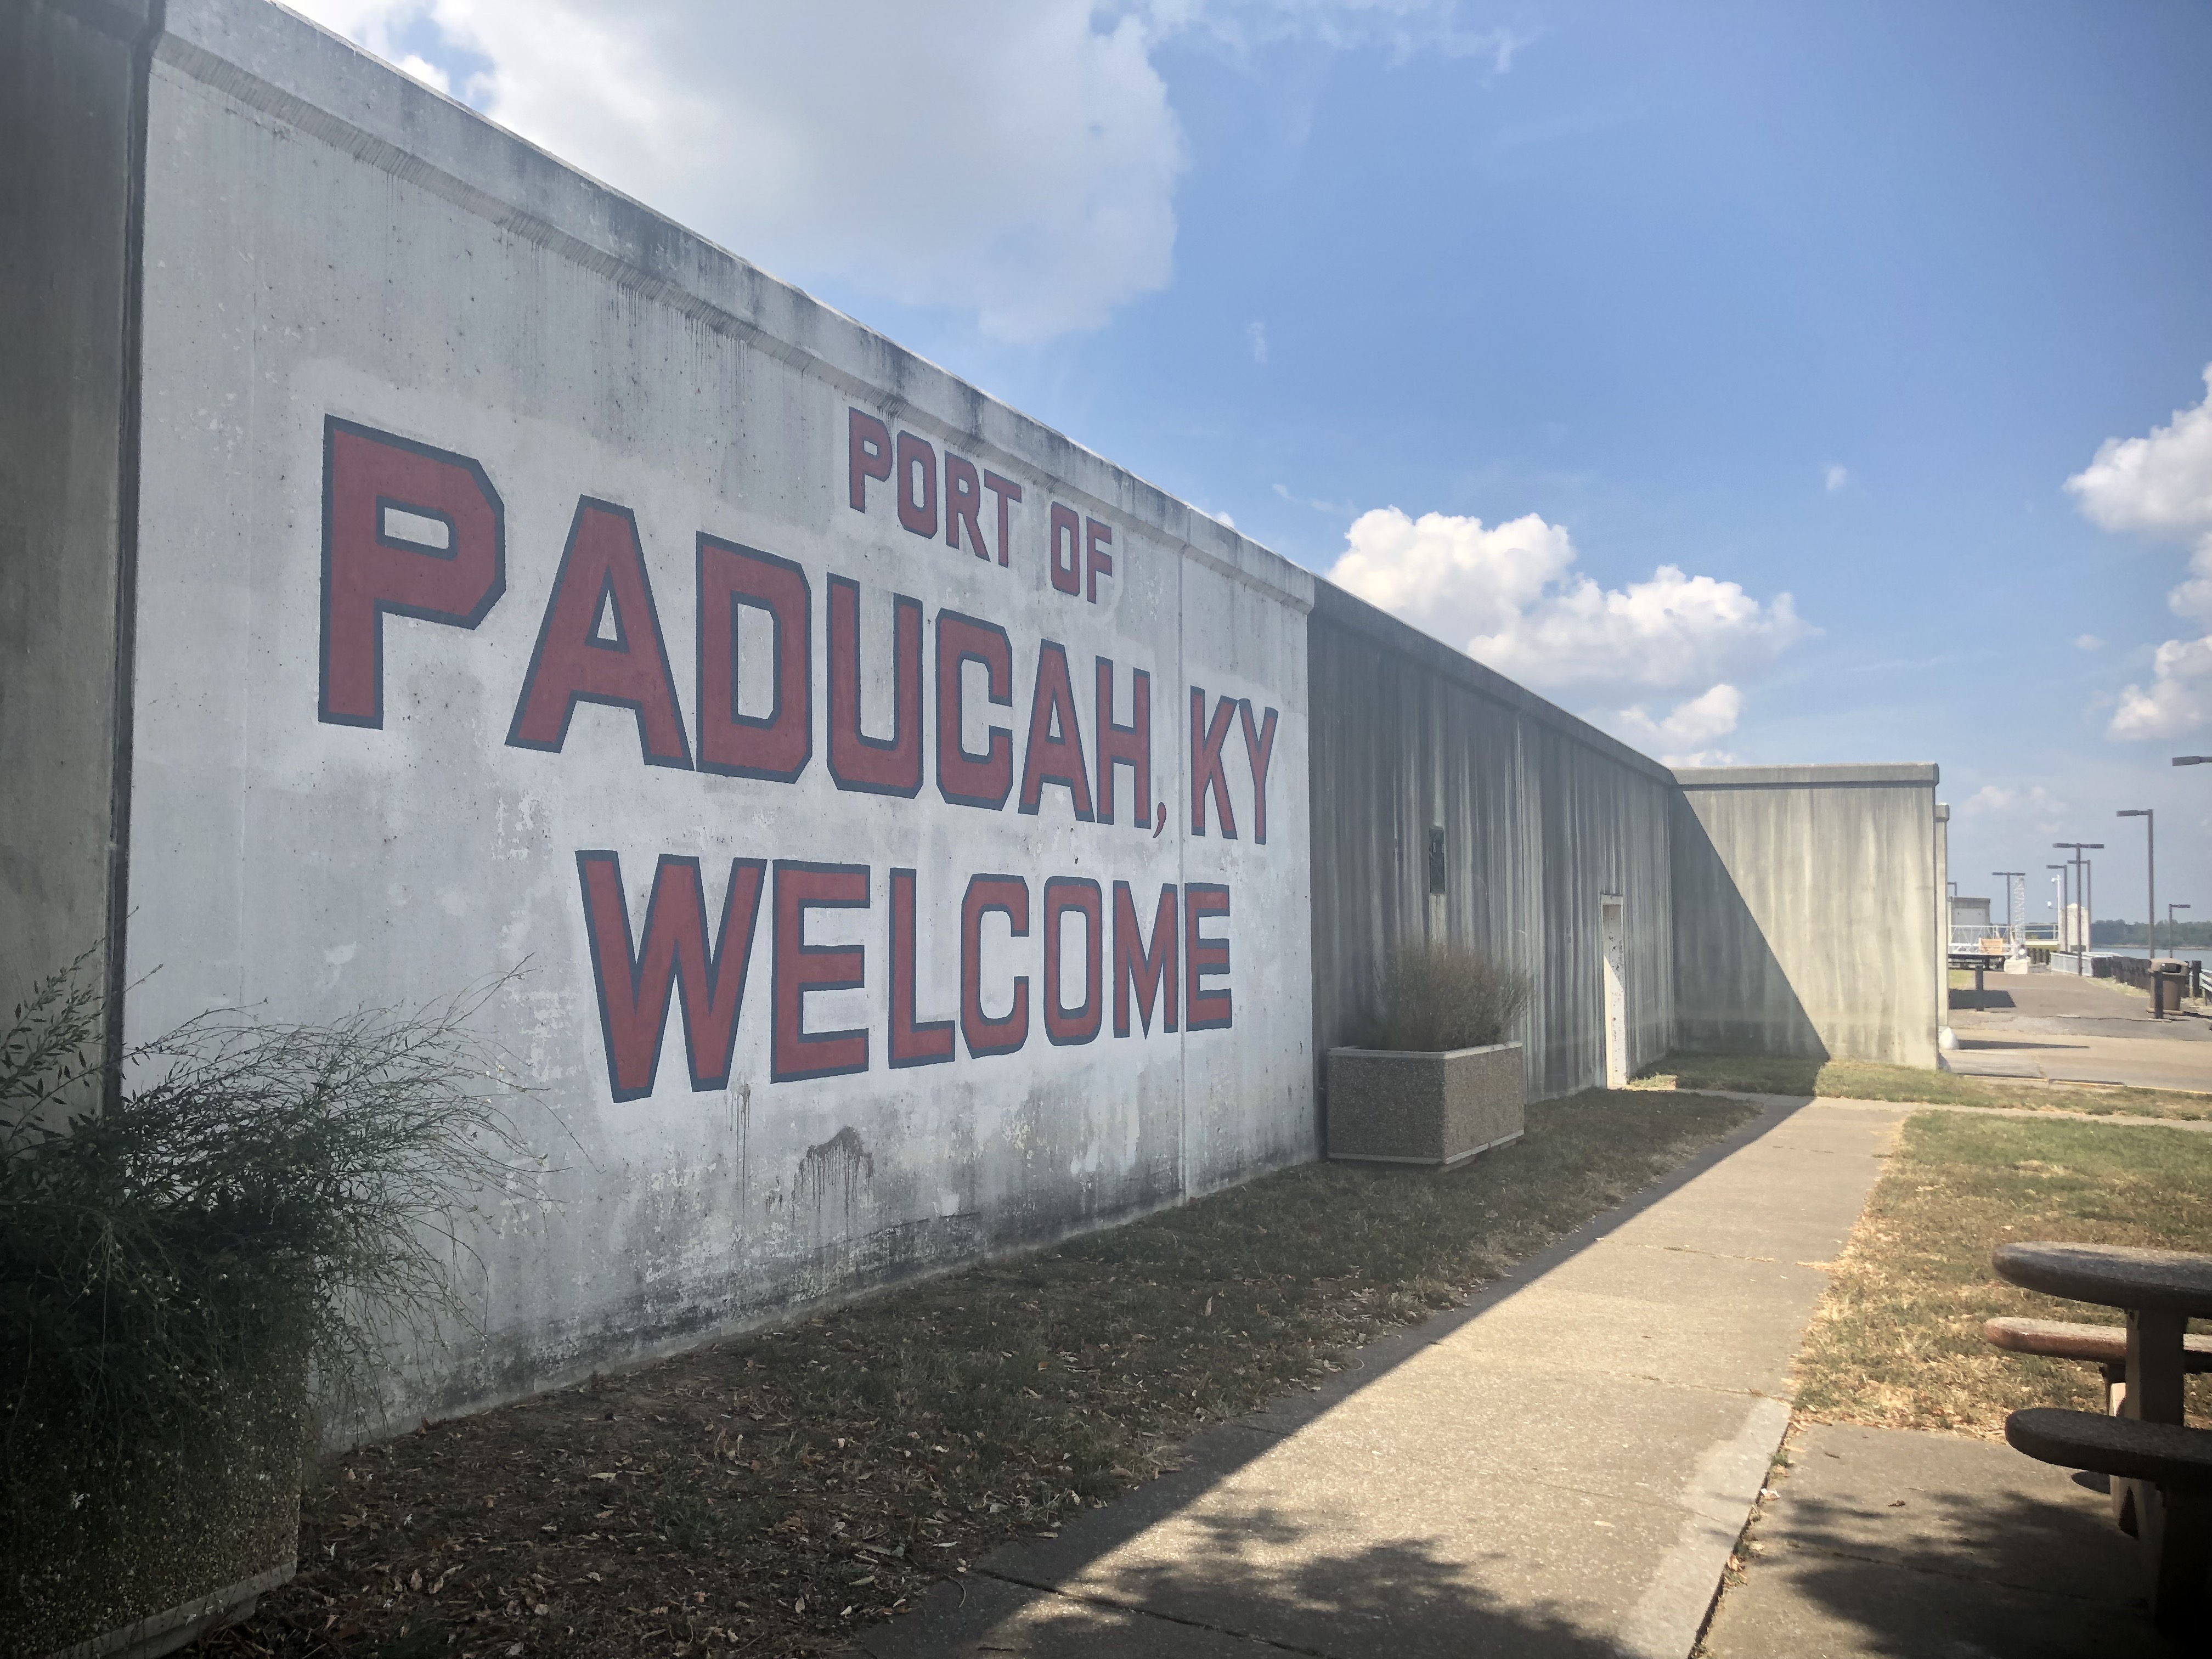 The flood wall separates the Ohio River from downtown Paducah. The wall is adorned with some text in red, bold capital letters that read "Port of Paducah, KY Welcome." In February of 2019 Ohio River flooding caused Paducah to put up its floodgates. The Paducah Gaseous Diffusion Plant is just a few miles from the Ohio River.